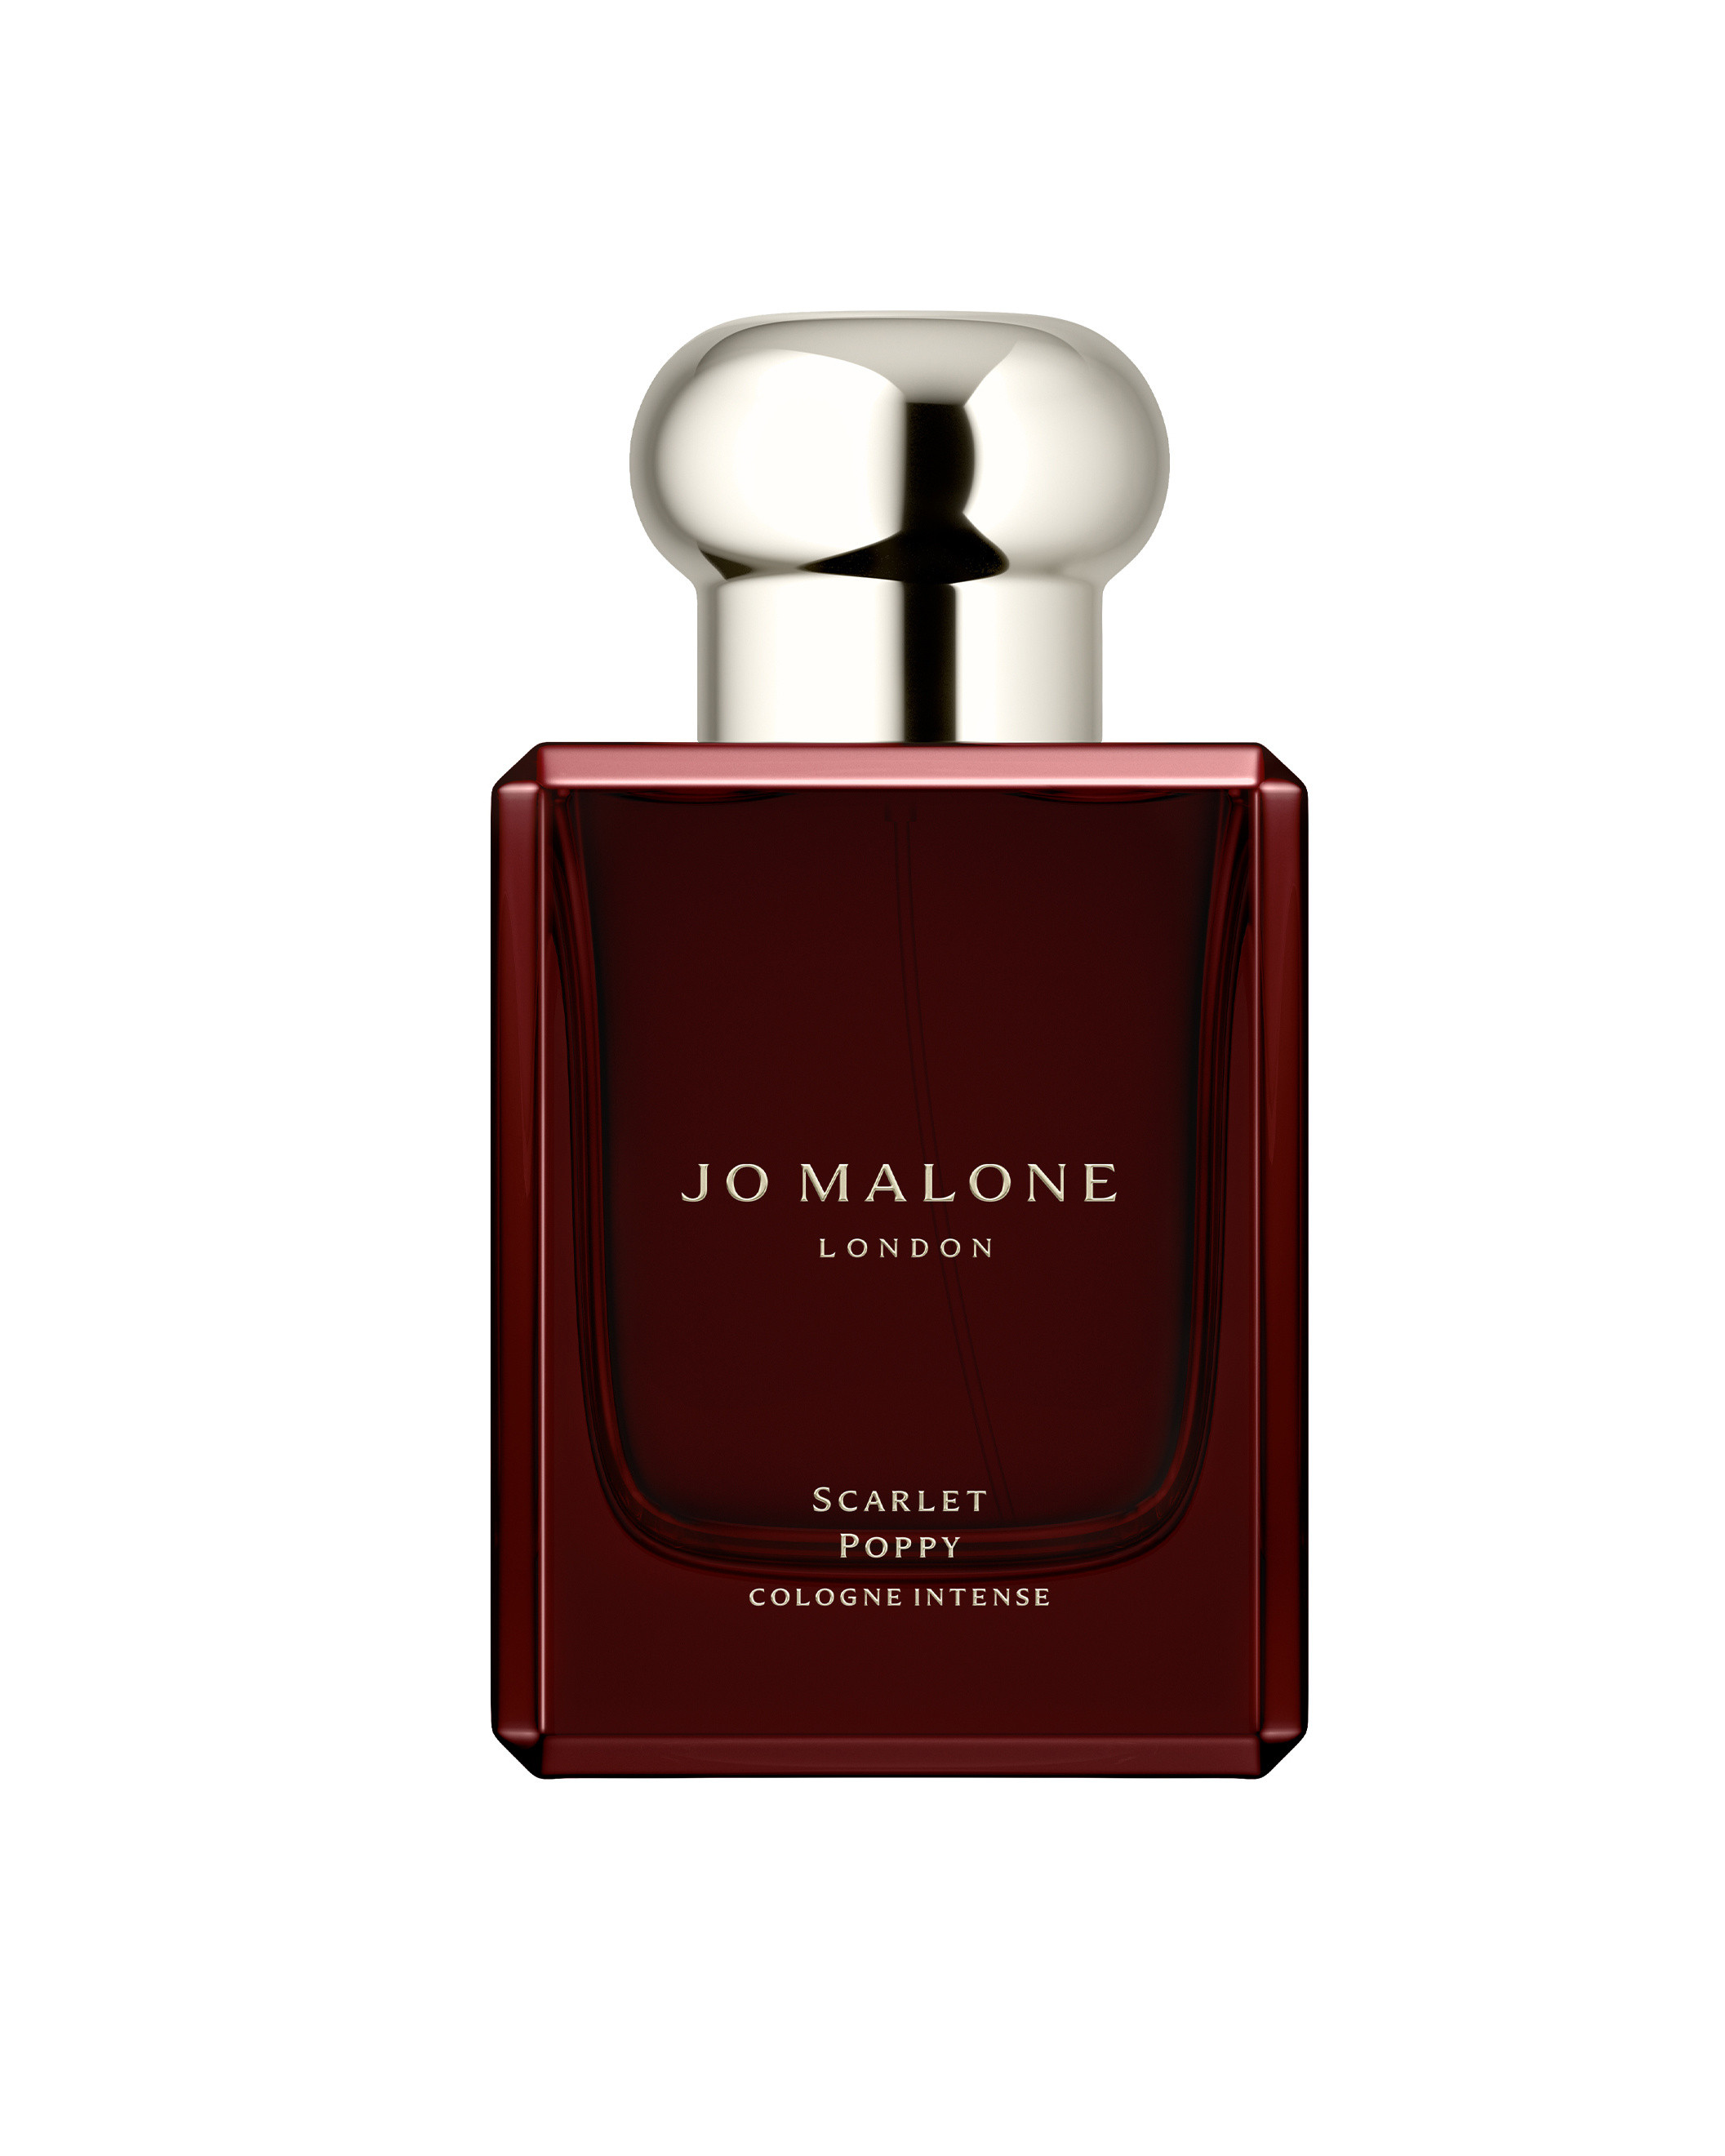 Jo Malone Scarlet Poppy Cologne Intense 50 ml, Rosso, large image number 0